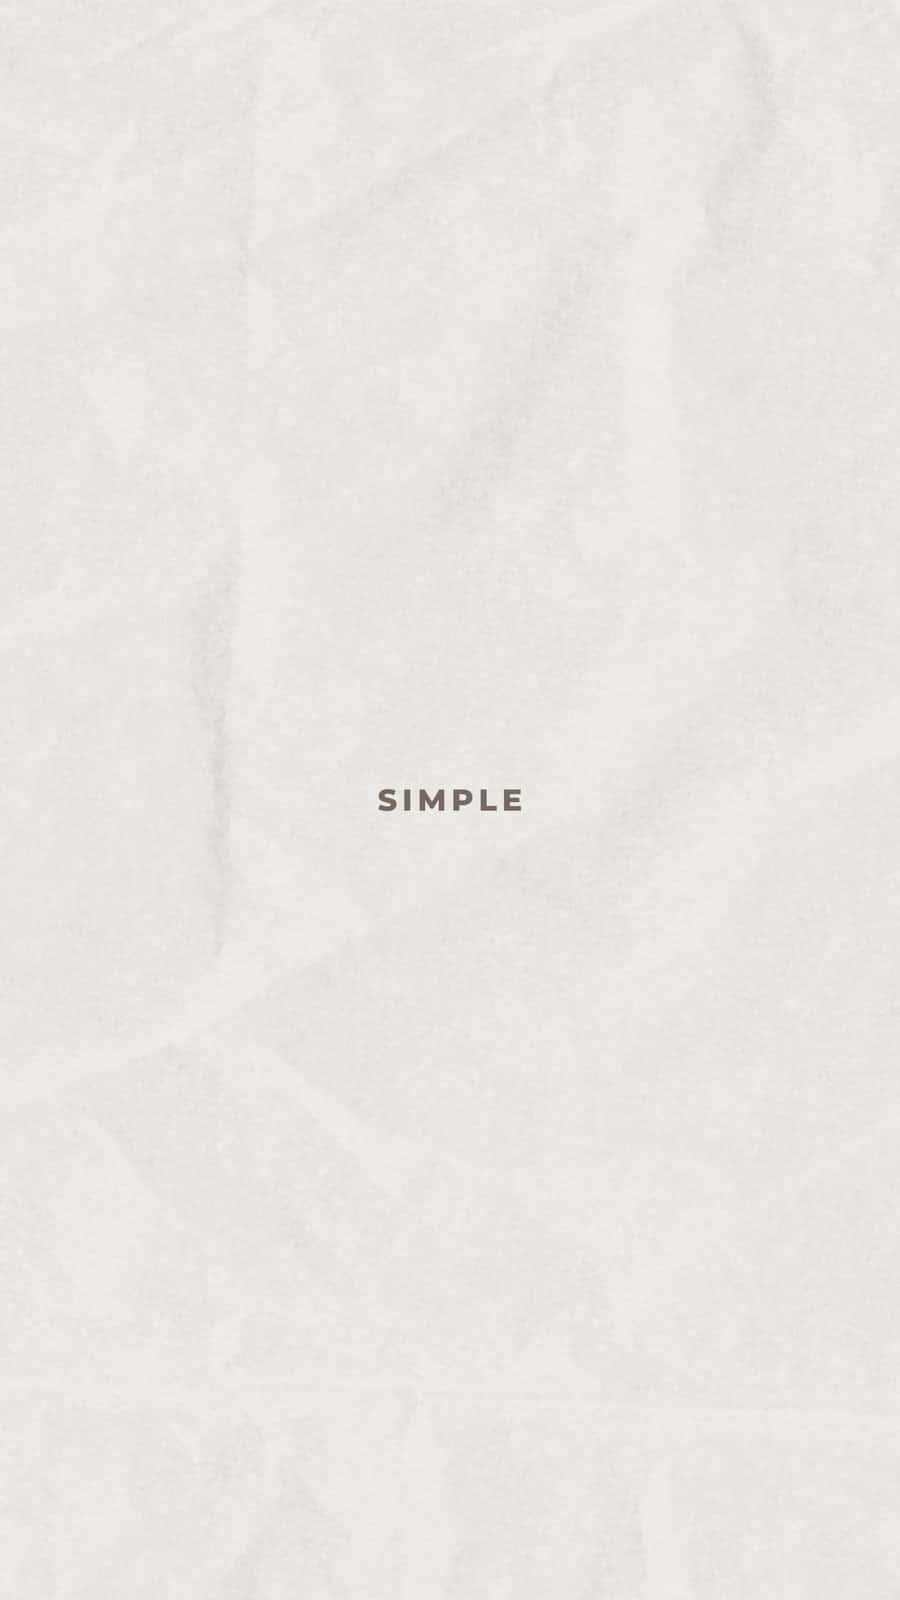 Simple - A Simple - A Simple - A Simple - A Simple - A Simple - A Simple Background